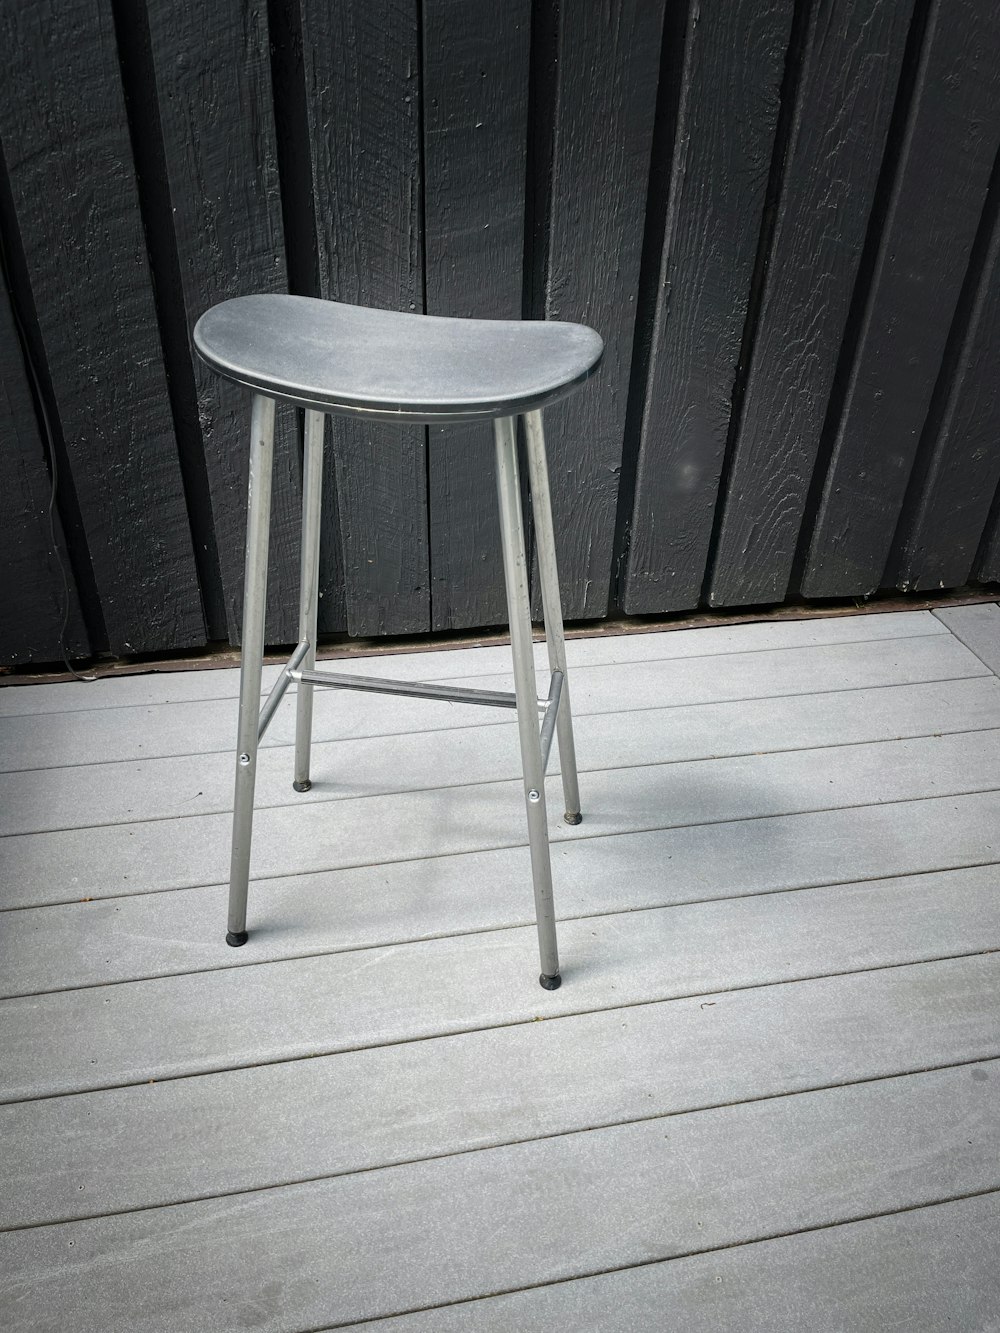 a metal stool sitting on top of a wooden floor